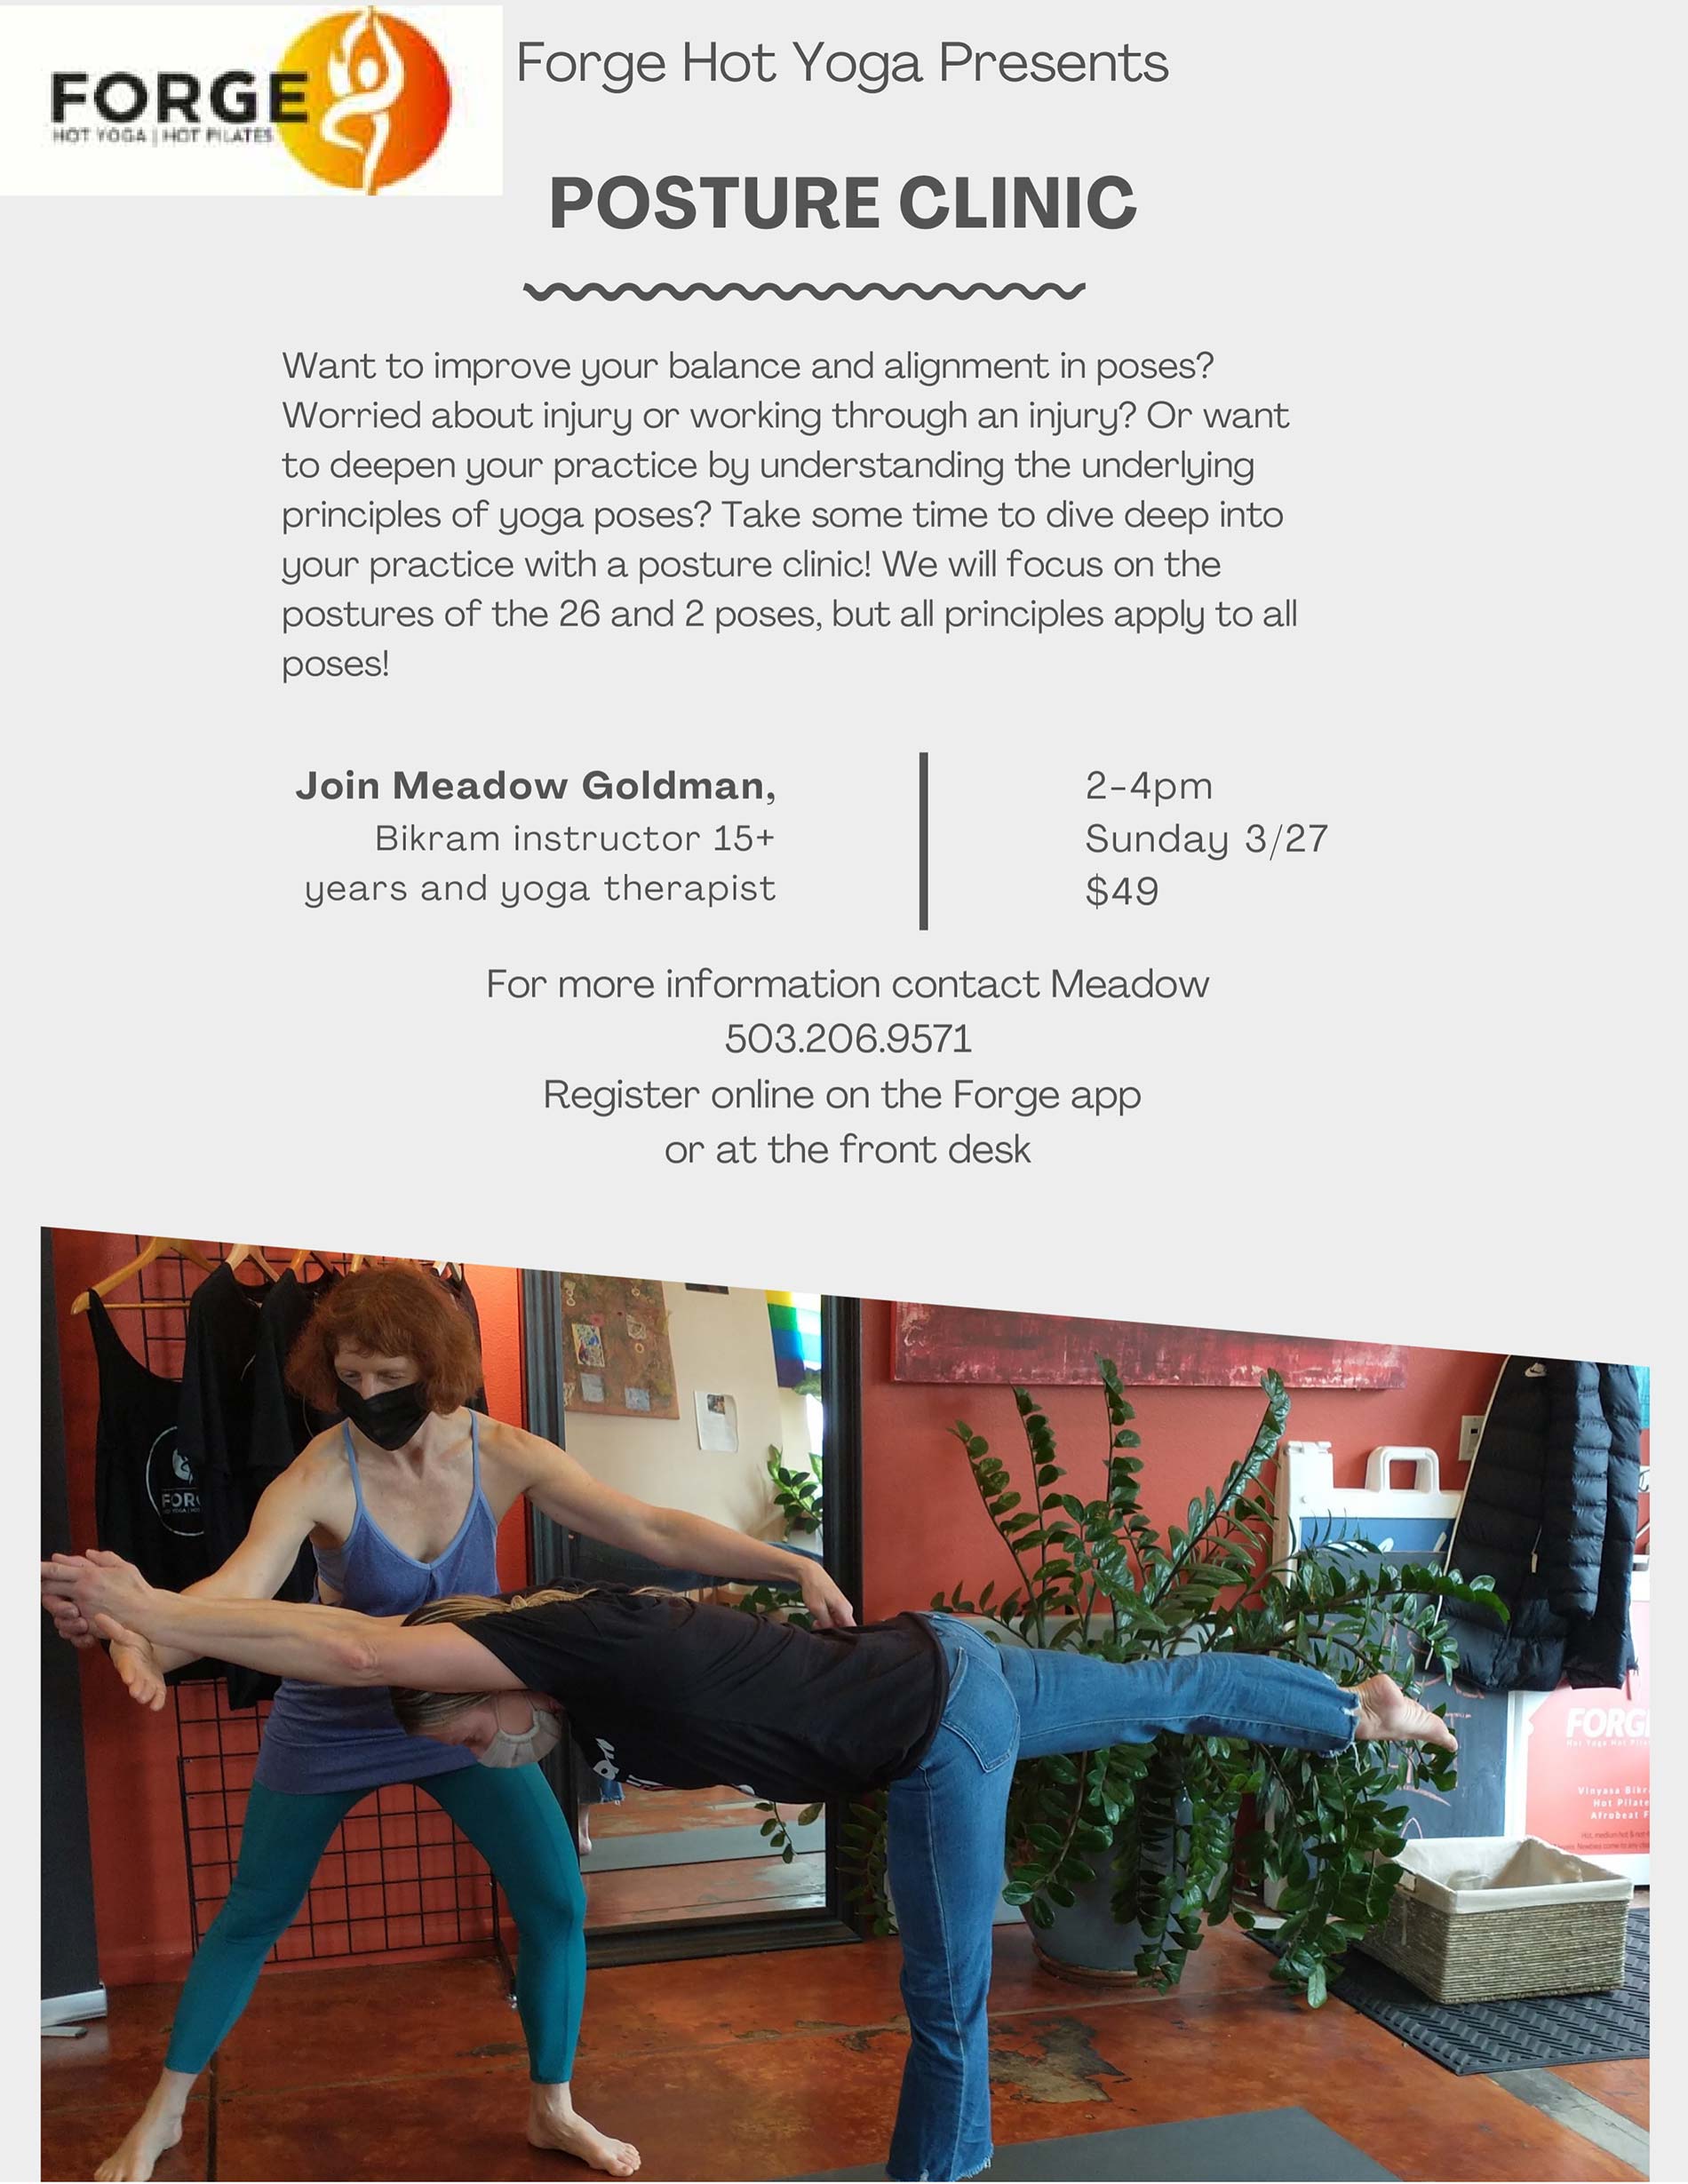 Forge Hot Yoga in Portland Posture clinic class flyer